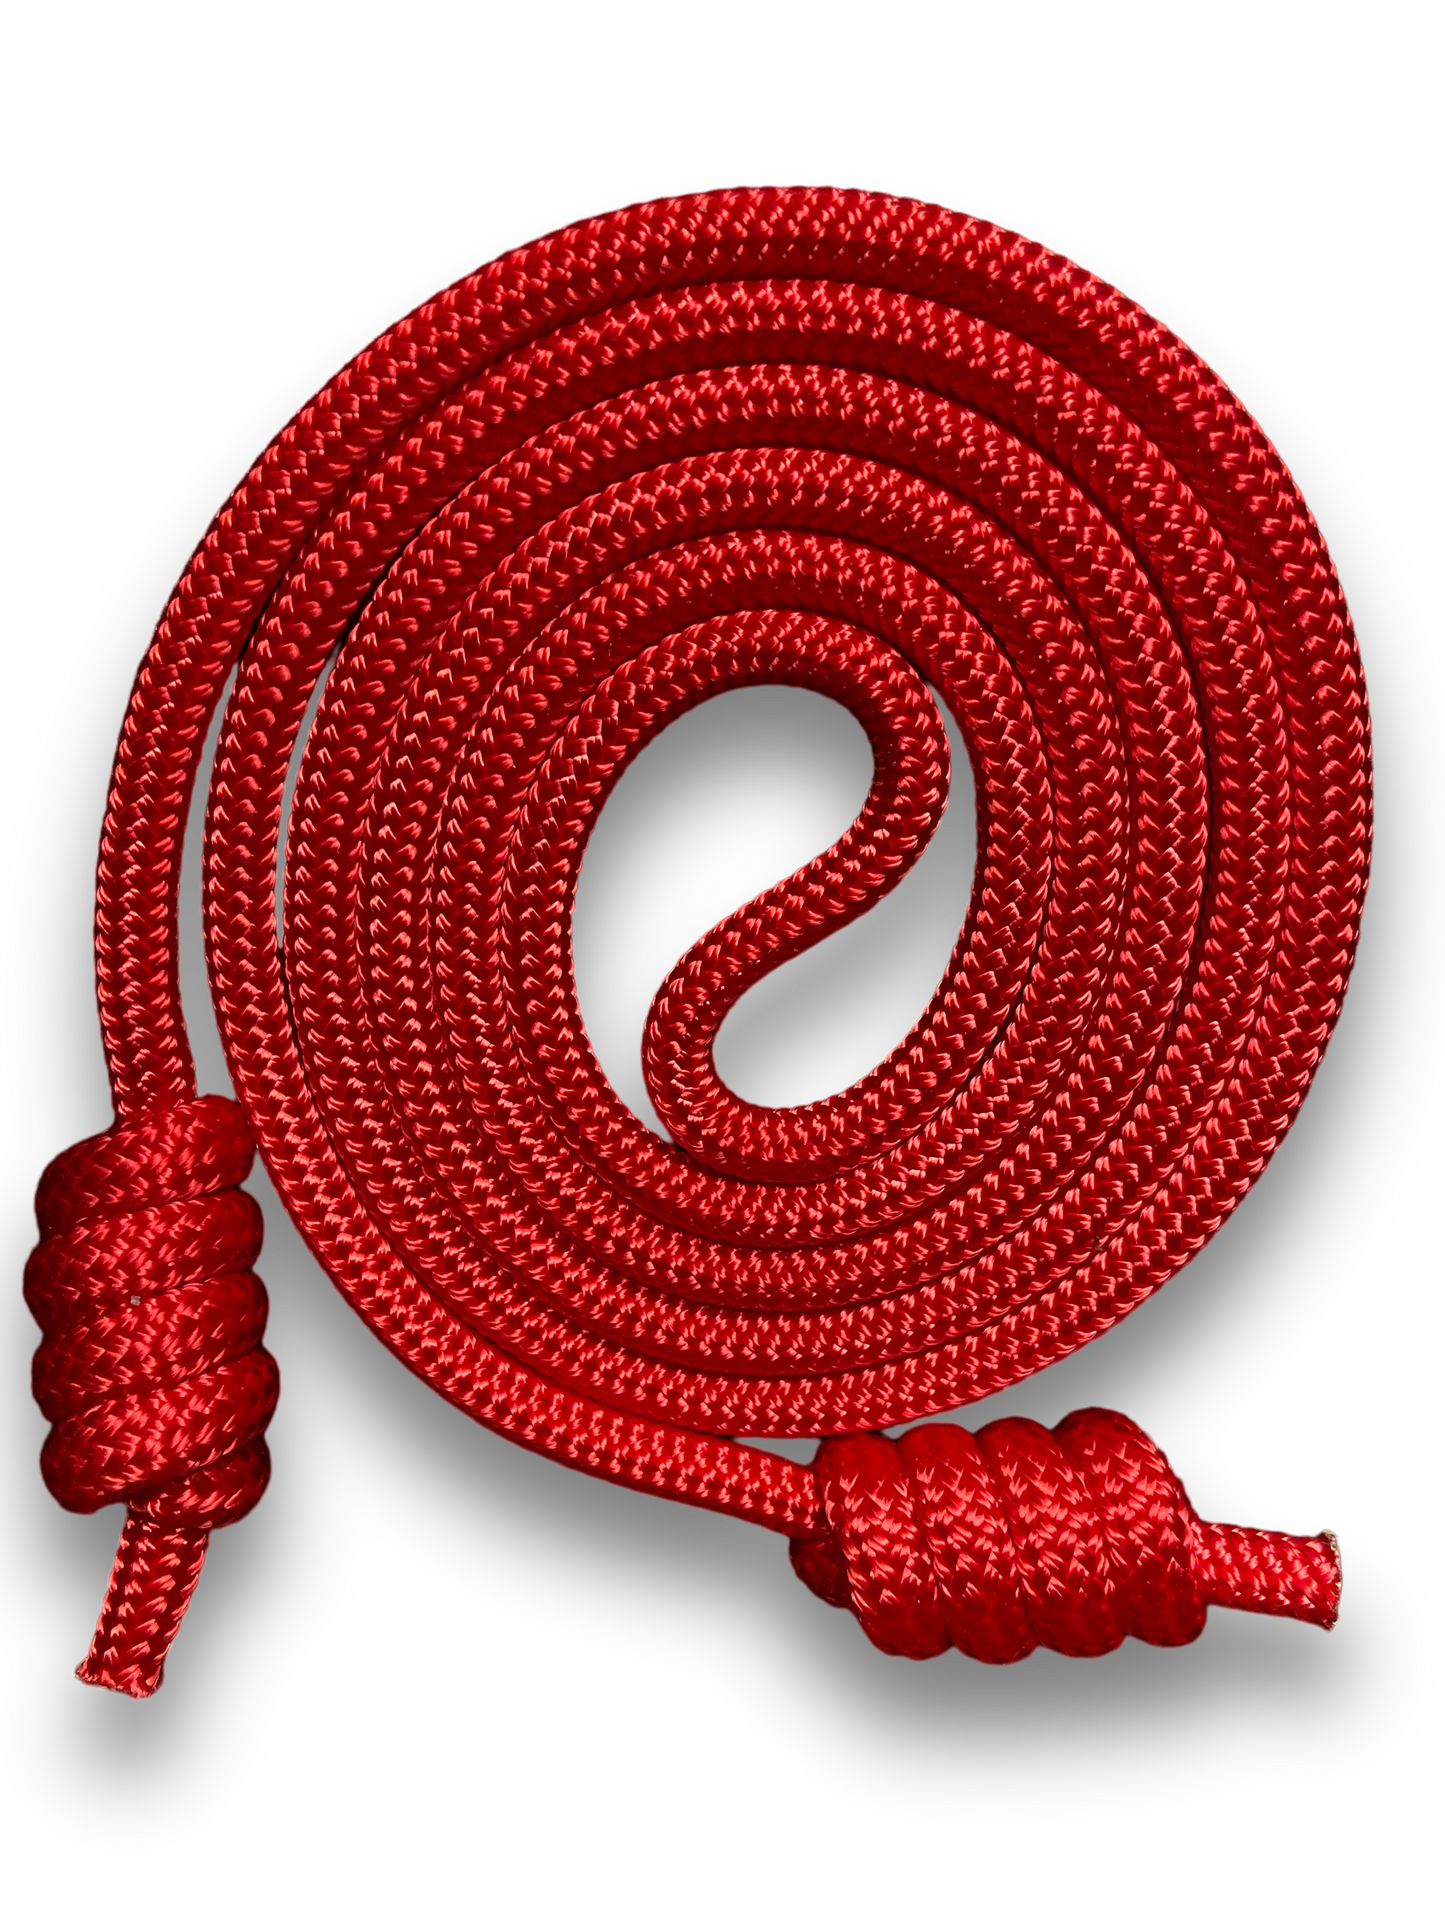 Kids Red Flow Rope 8 MM 100 grams Small, safe and Lightweight Rope